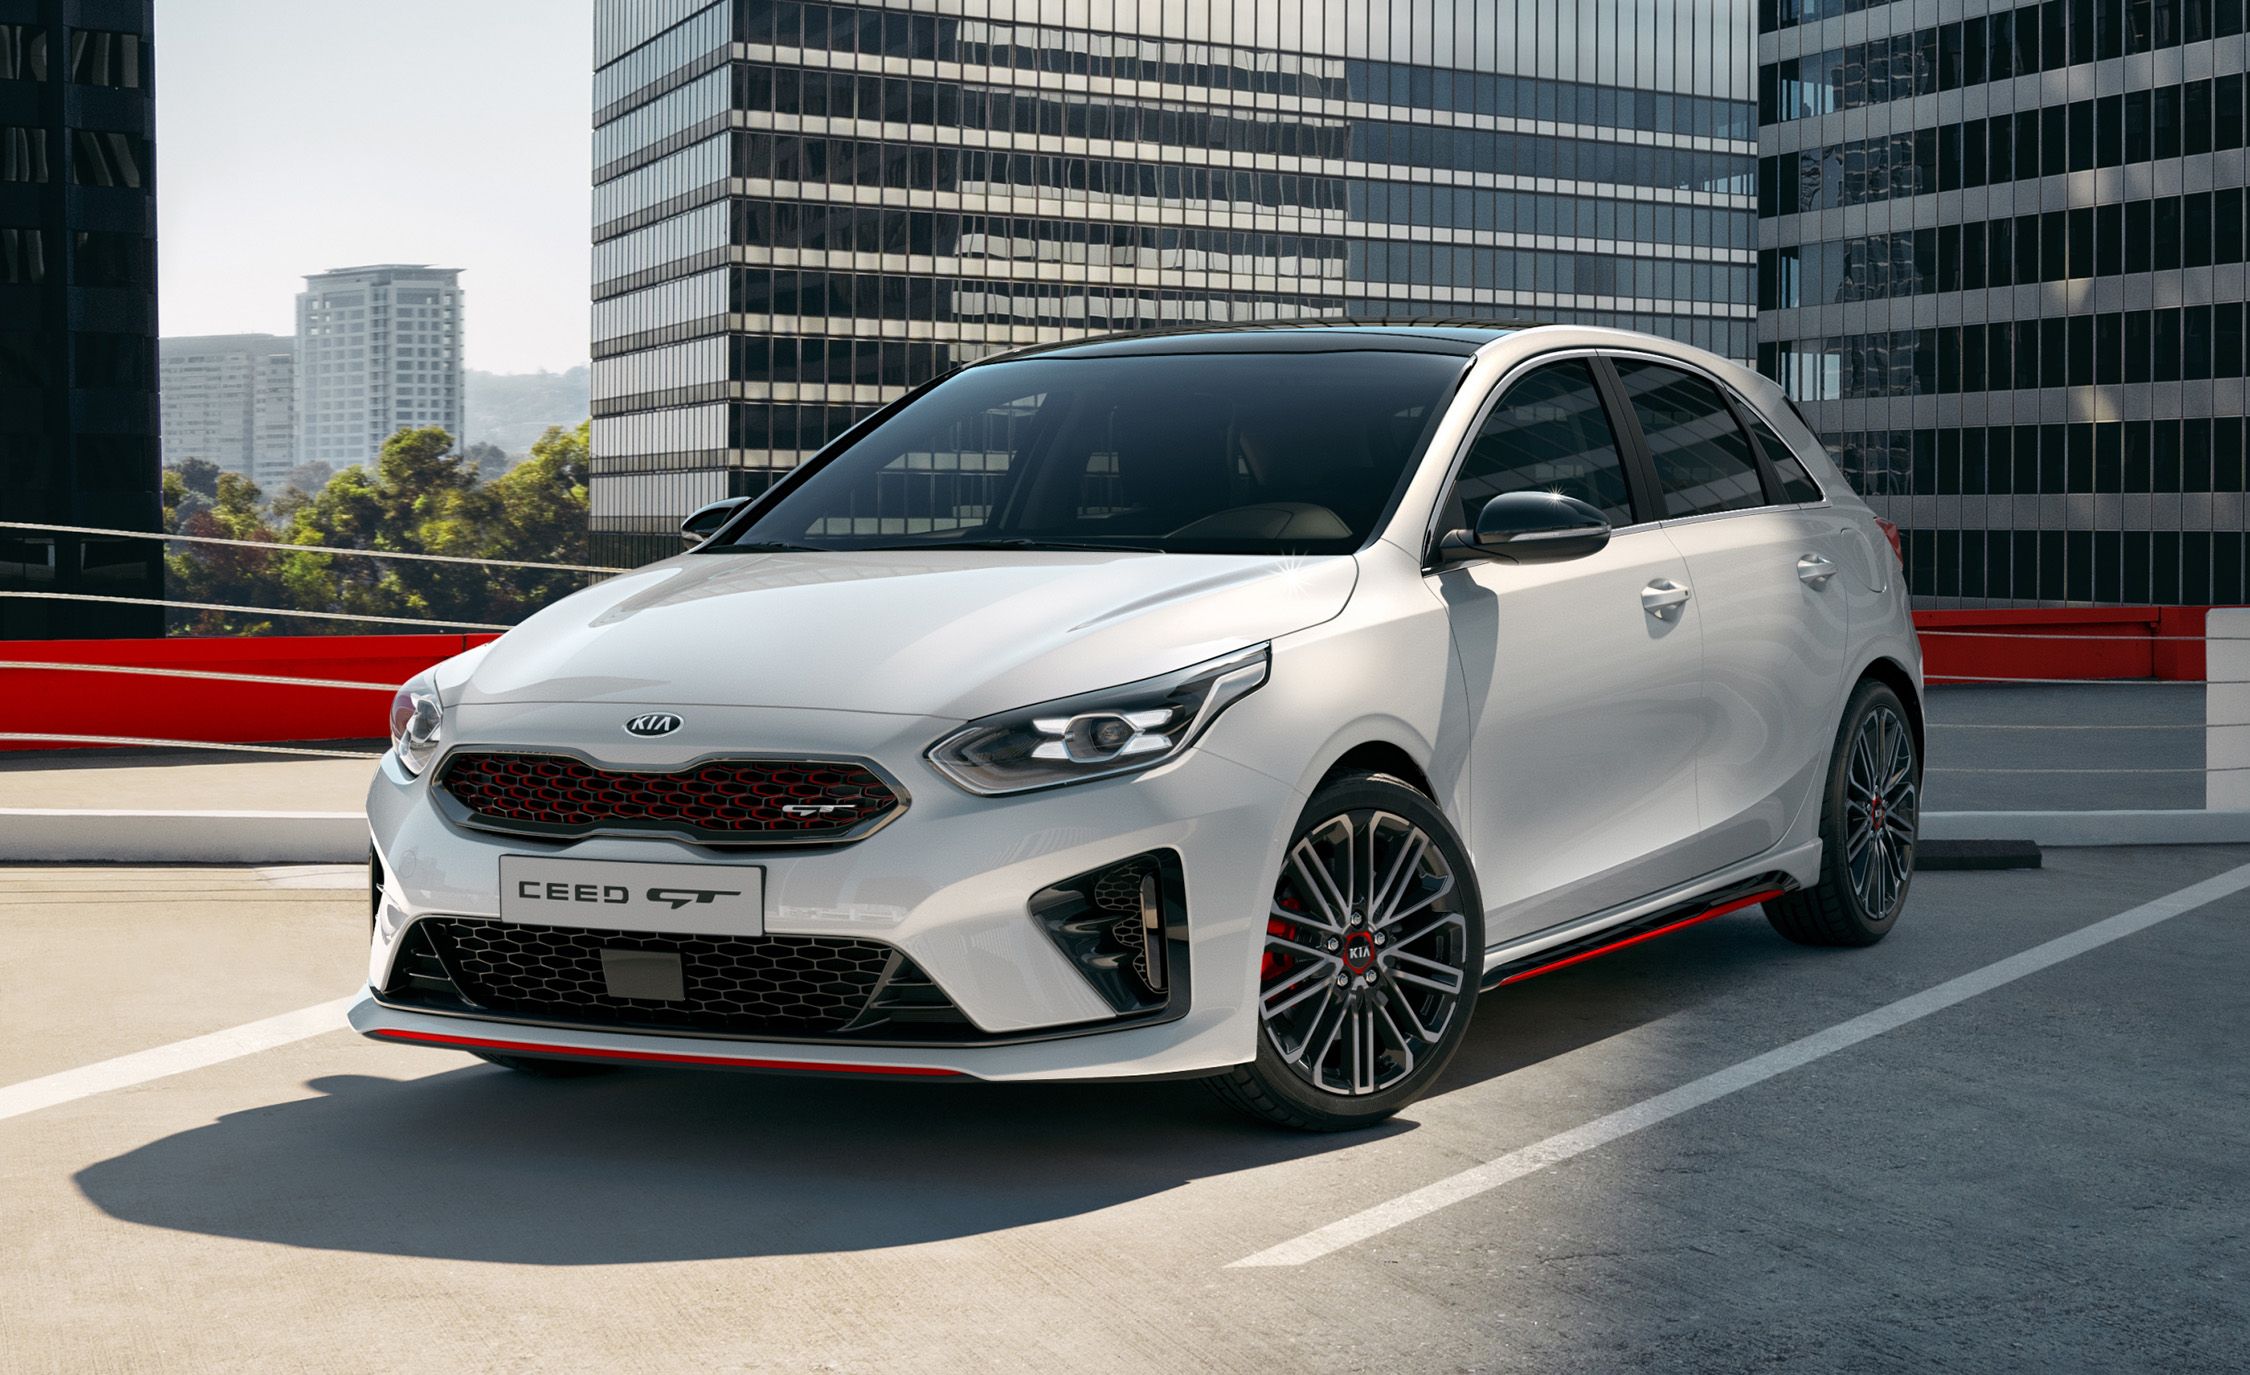 Kia ProCeed Wagon and Ceed GT Hot Hatch Revealed for Europe